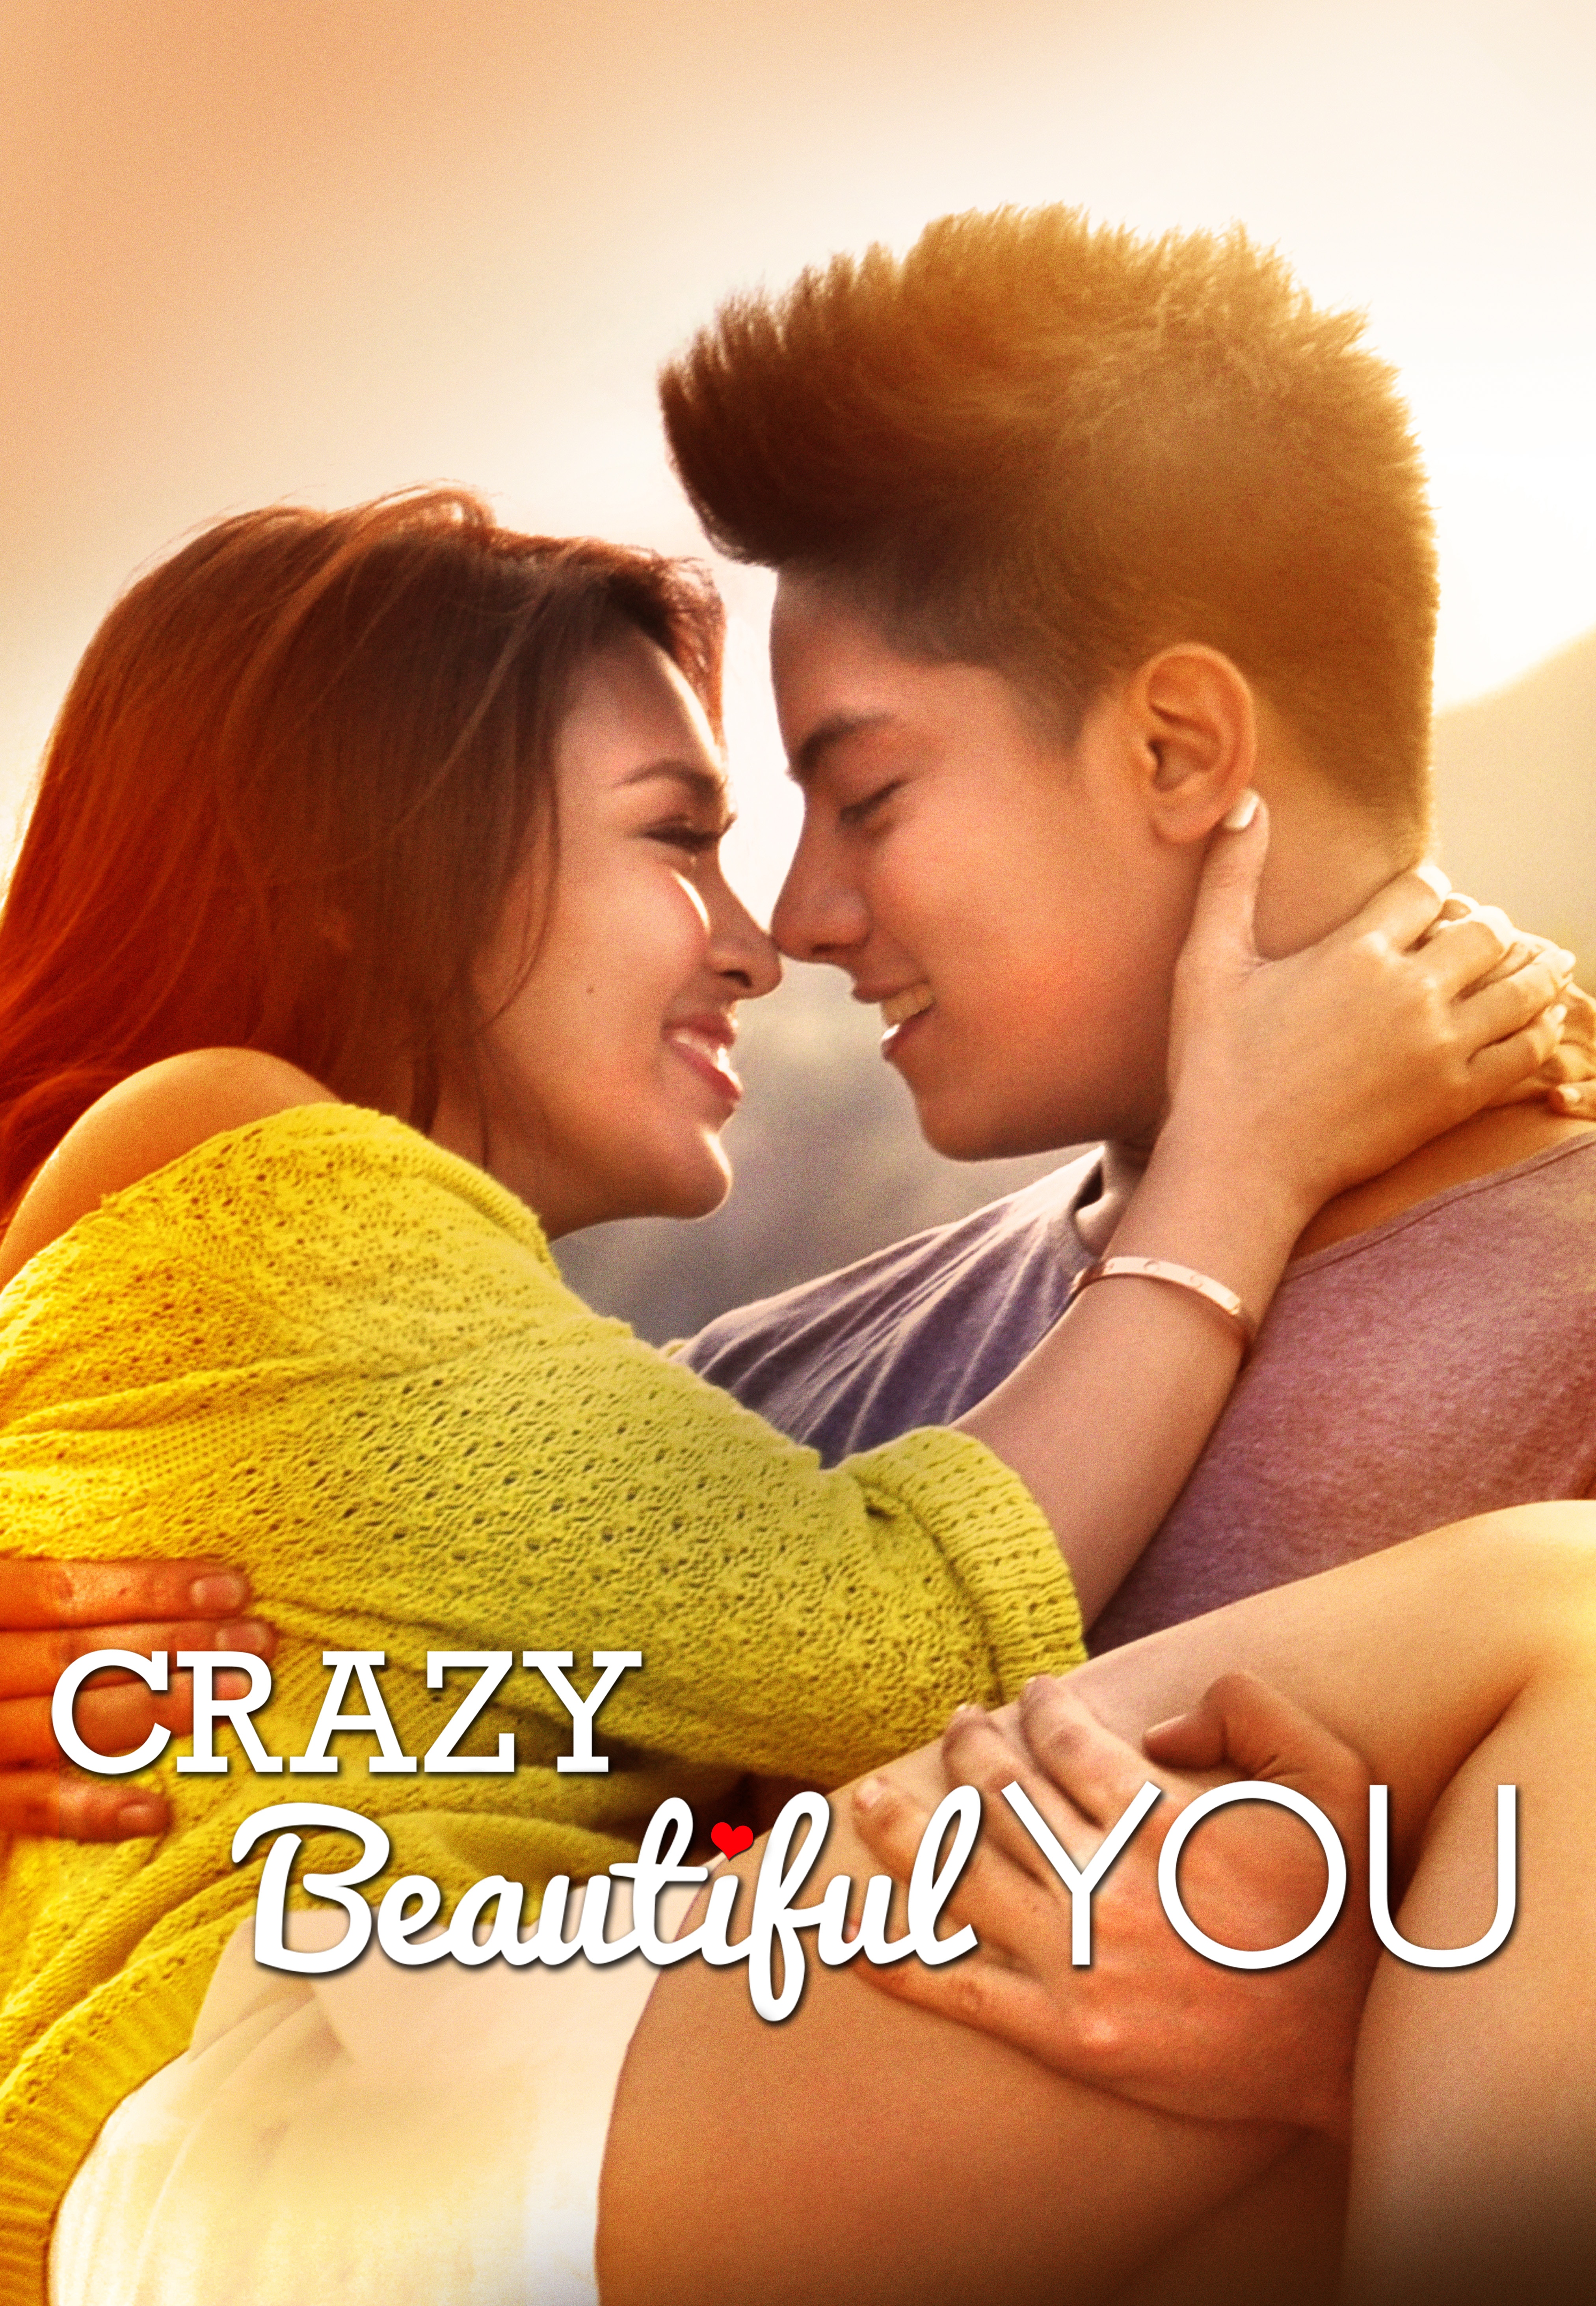 https://data-corporate.abs-cbn.com/corp/medialibrary/dotcom/isd_cast/298x442/crazy-beautiful-you-clean-poster.jpg?ext=.jpg